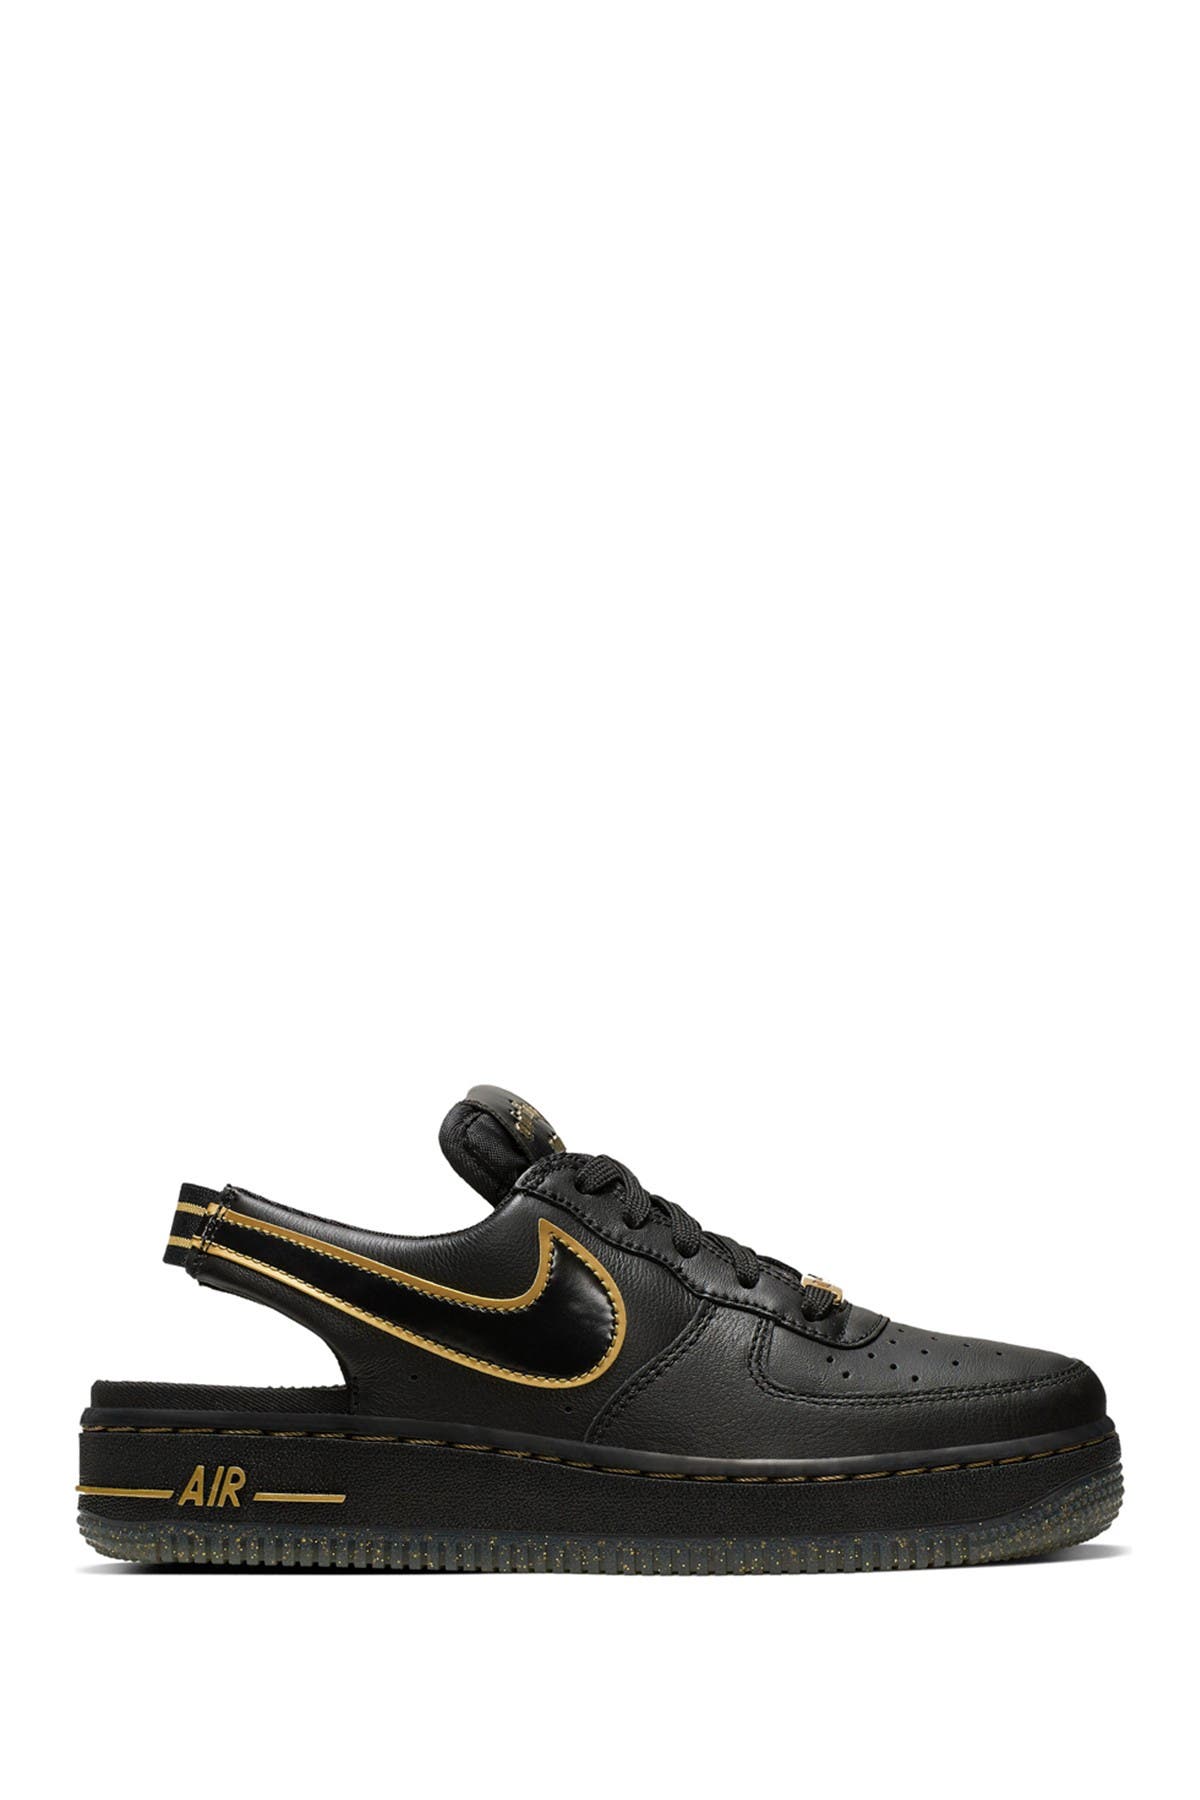 air force 1 vtf trainers